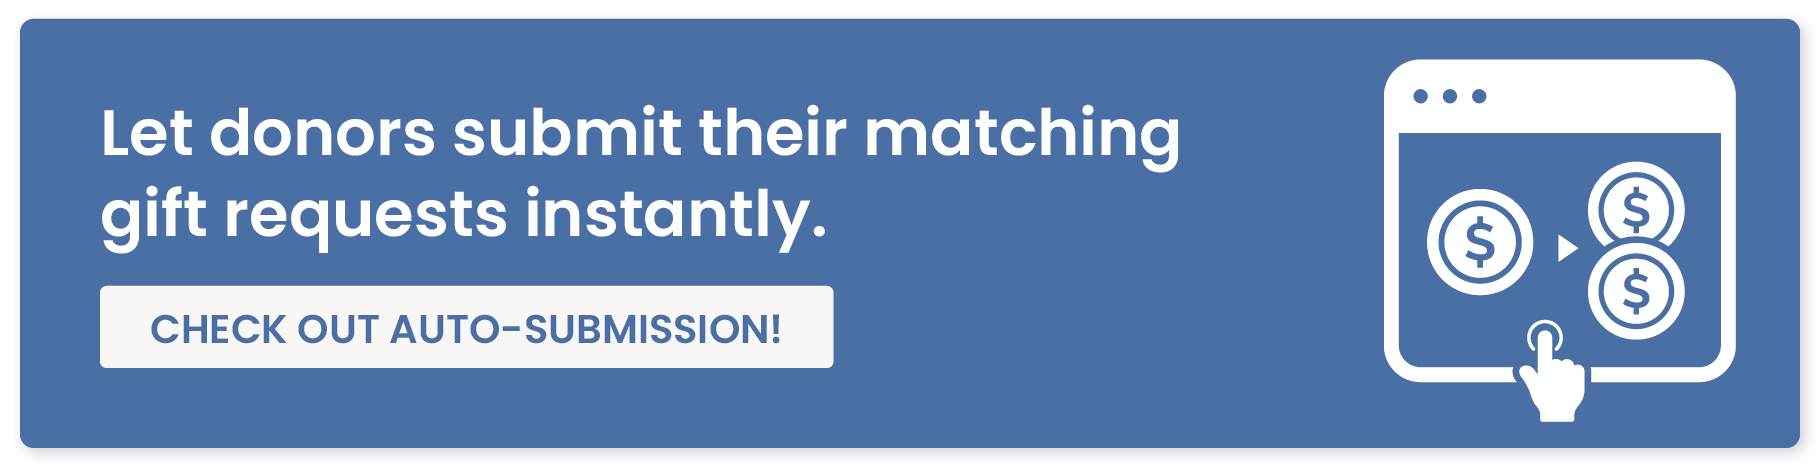 Let donors submit their matching gift requests instantly. Check out auto-submission. 